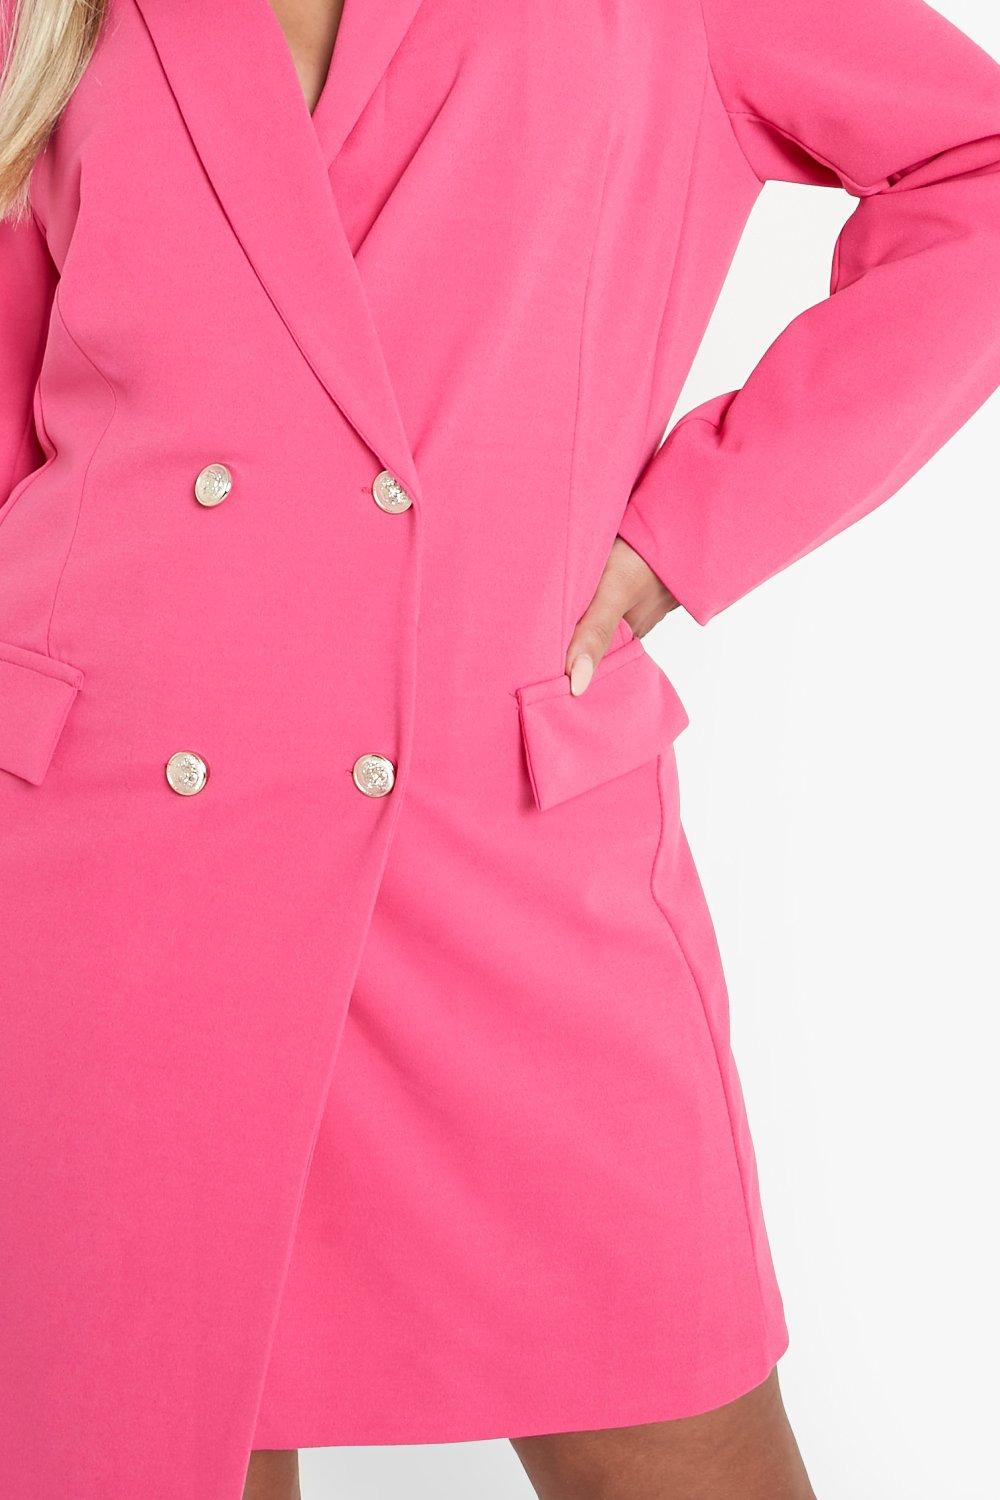 Unique21® Blazer Dress, Luxe Stain Breasted Hot Pink, 51% OFF